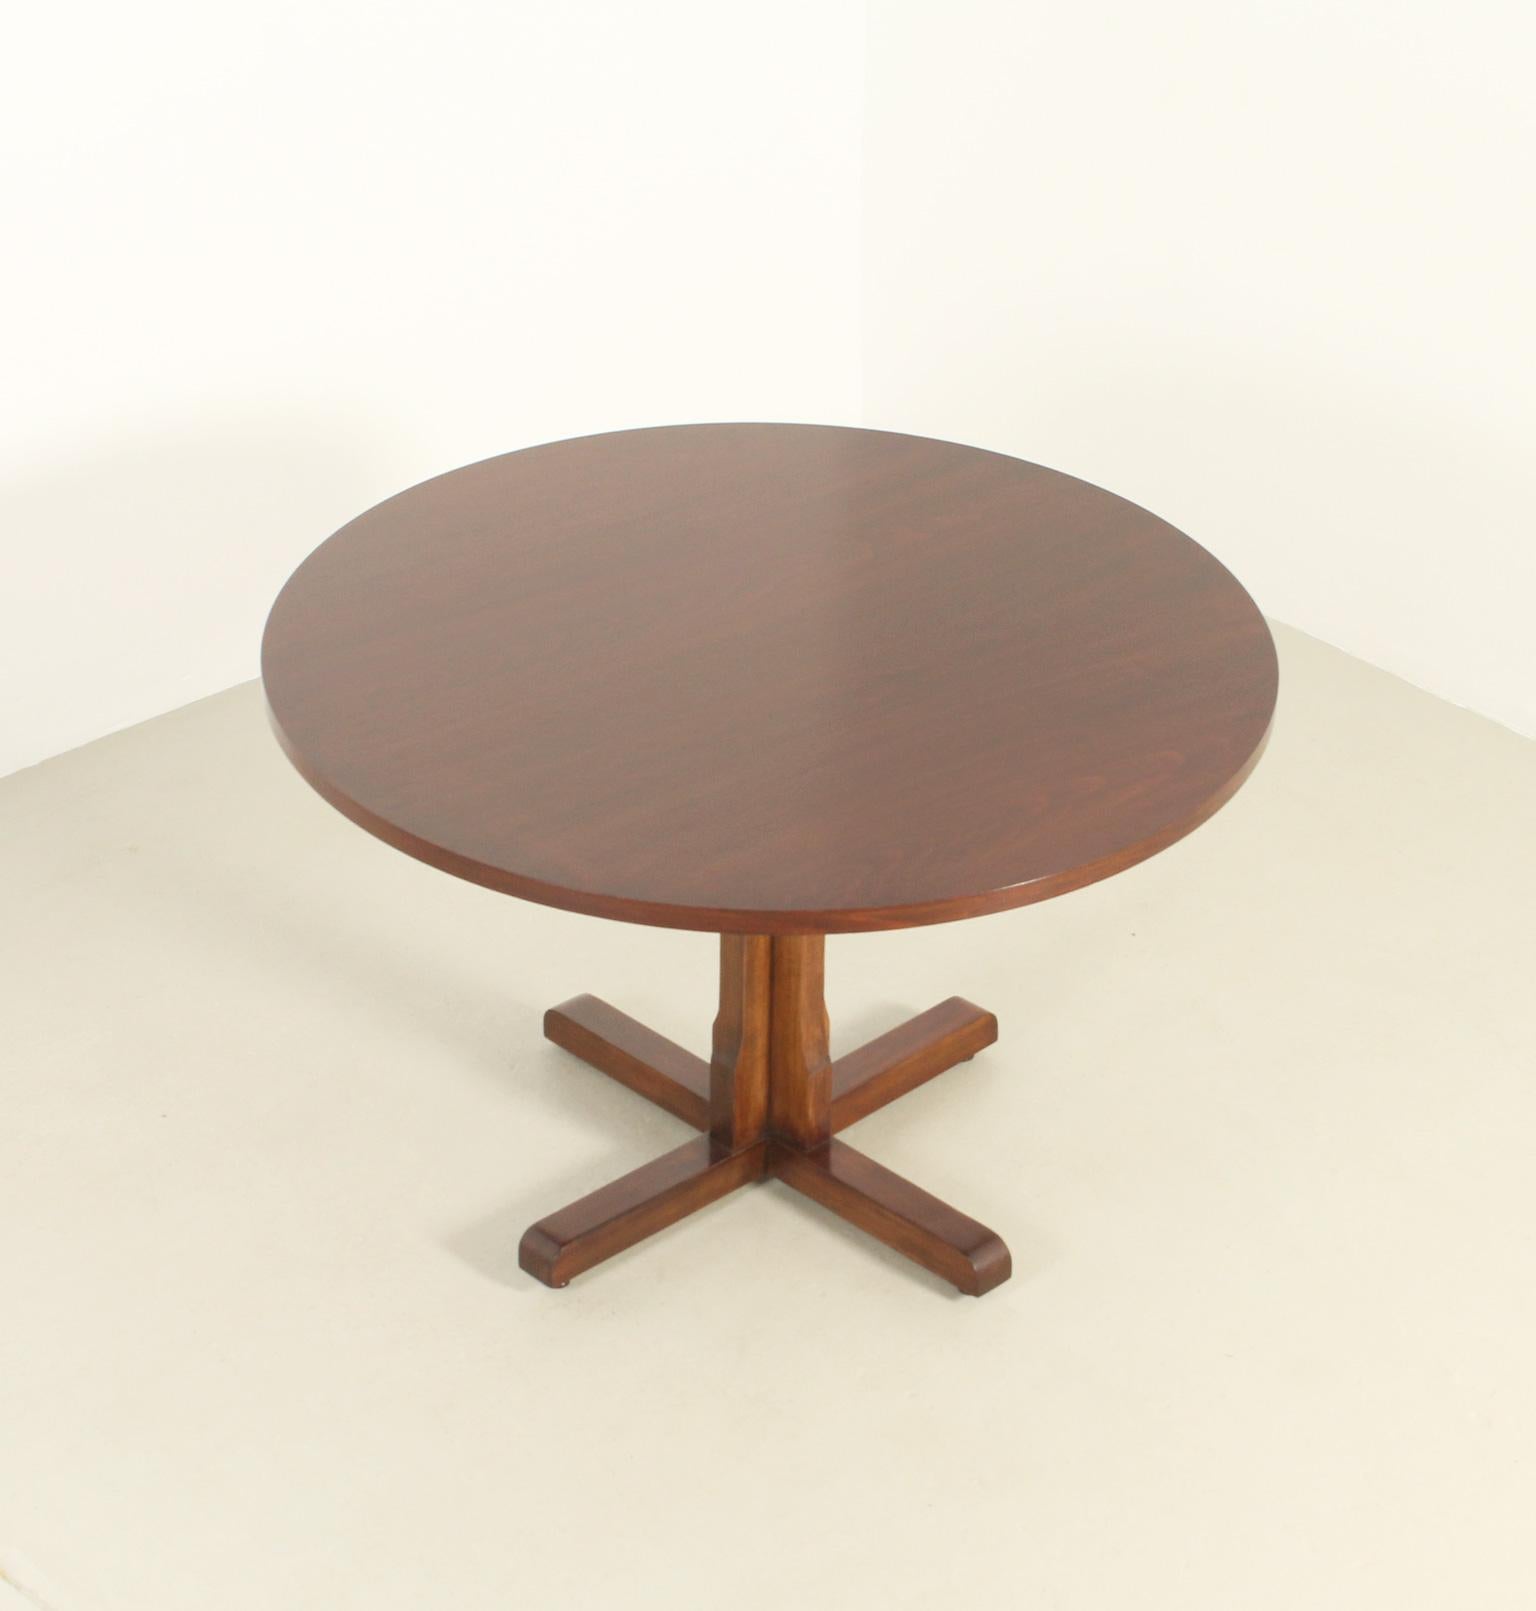 Round Dining Table in Walnut Wood by Jordi Vilanova, Spain, 1960's For Sale 8